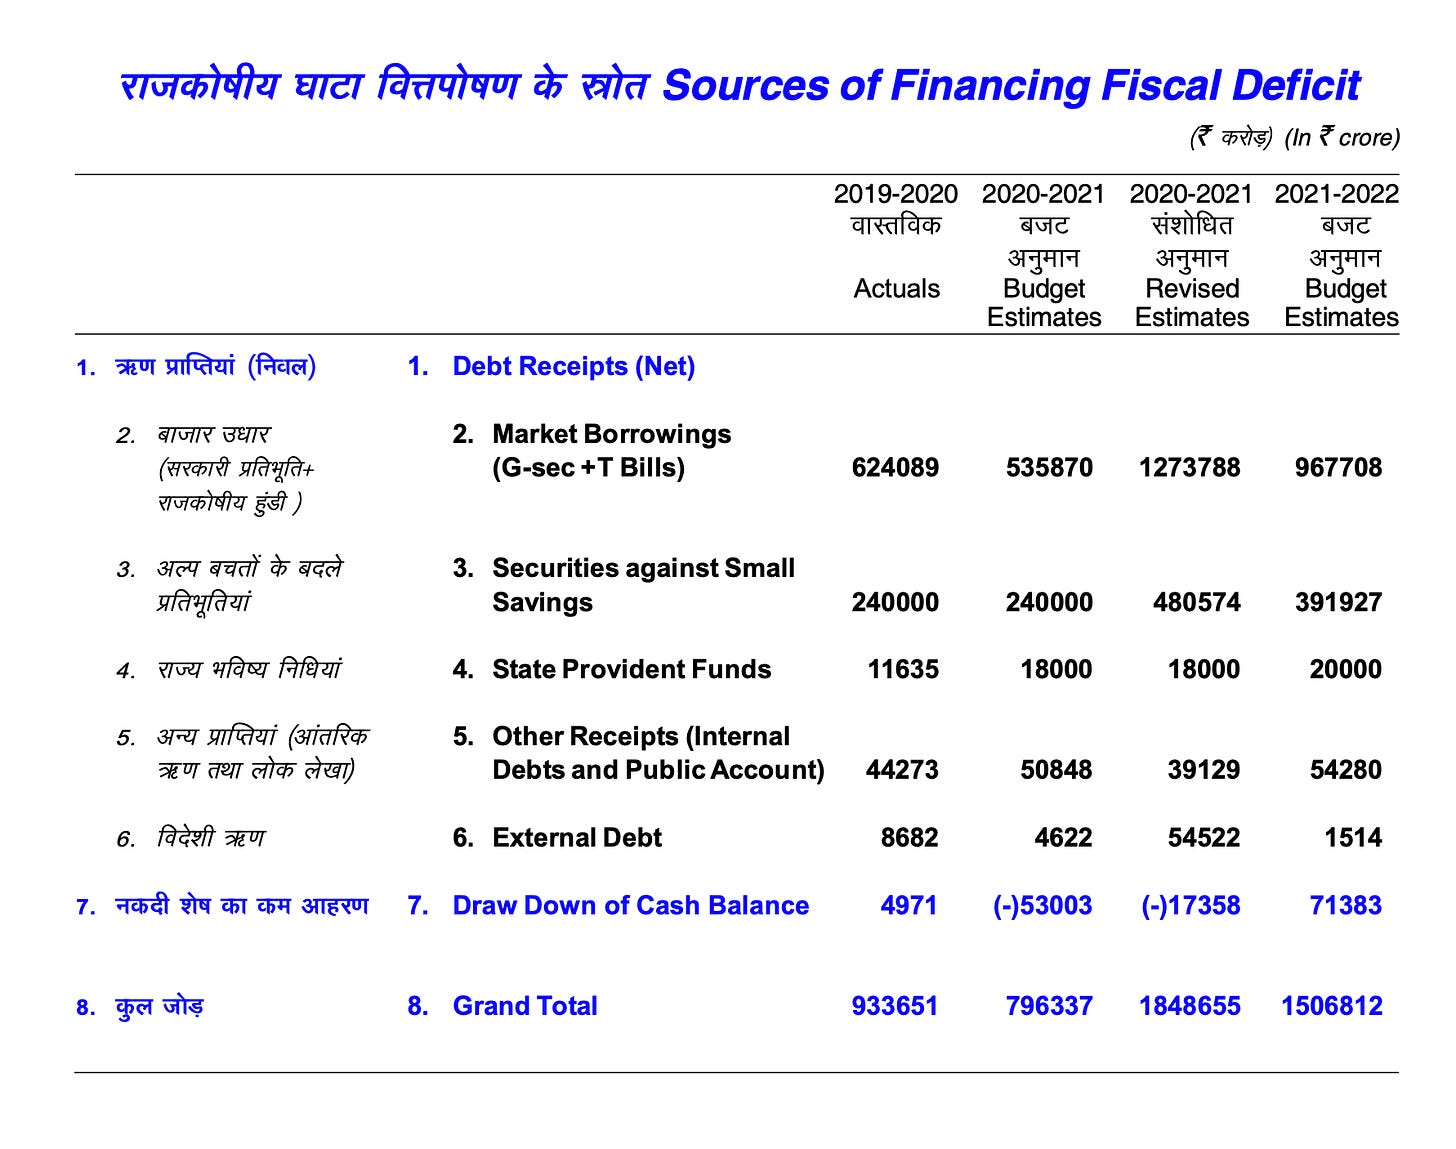 Sources of Financing Fiscal Deficit 
(t (In ecrore) 
2019-2020 2020-2021 
1. 
7. 
8. 
1. 
7. 
8. 
Debt Receipts (Net) 
2. 
3. 
4. 
5. 
(3i'iä7?T 
2. 
3. 
4. 
5. 
6. 
Market Borrowings 
(G-sec +T Bills) 
Securities against Small 
Savings 
State Provident Funds 
Other Receipts (Internal 
Debts and Public Account) 
External Debt 
Draw Down of Cash Balance 
Grand Total 
Actuals 
624089 
240000 
11635 
44273 
8682 
4971 
933651 
Budget 
Estimates 
535870 
240000 
18000 
50848 
4622 
(-)53003 
796337 
2020-2021 
Revised 
Estimates 
1273788 
480574 
18000 
39129 
54522 
(-)17358 
1848655 
2021-2022 
Budget 
Estimates 
967708 
391927 
20000 
54280 
1514 
71383 
1506812 